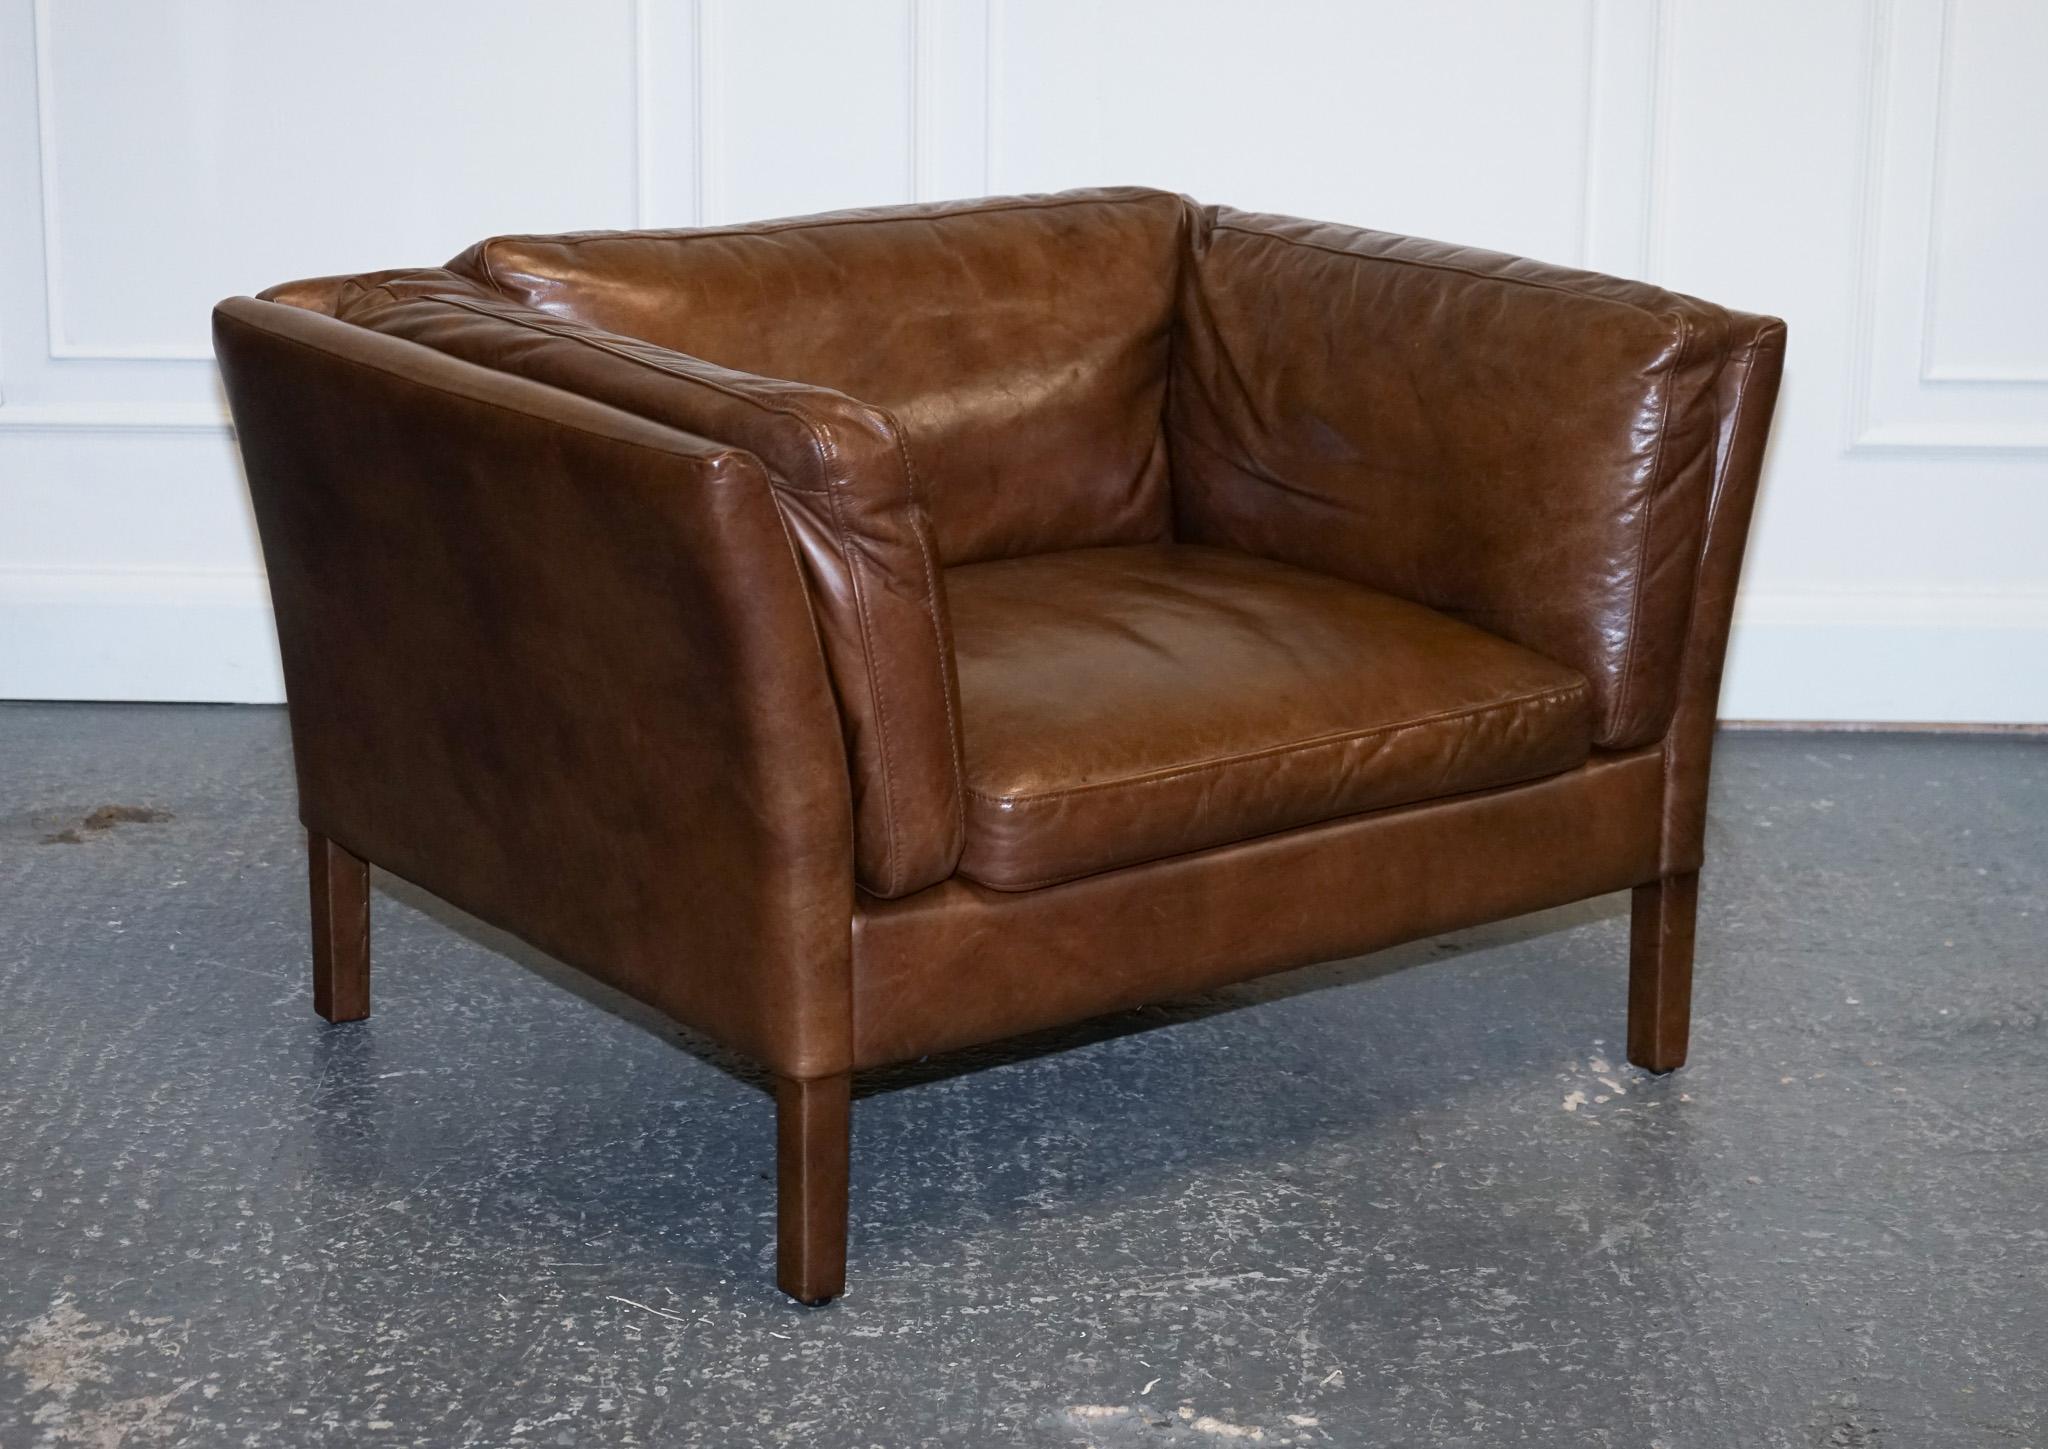 
We are delighted to offer for sale this Buttery Soft Halo Heritage Brown Leather Armchair.

The Halo Heritage brown leather compact armchair is a beautifully crafted piece of furniture that exudes both style and comfort. 

Made from